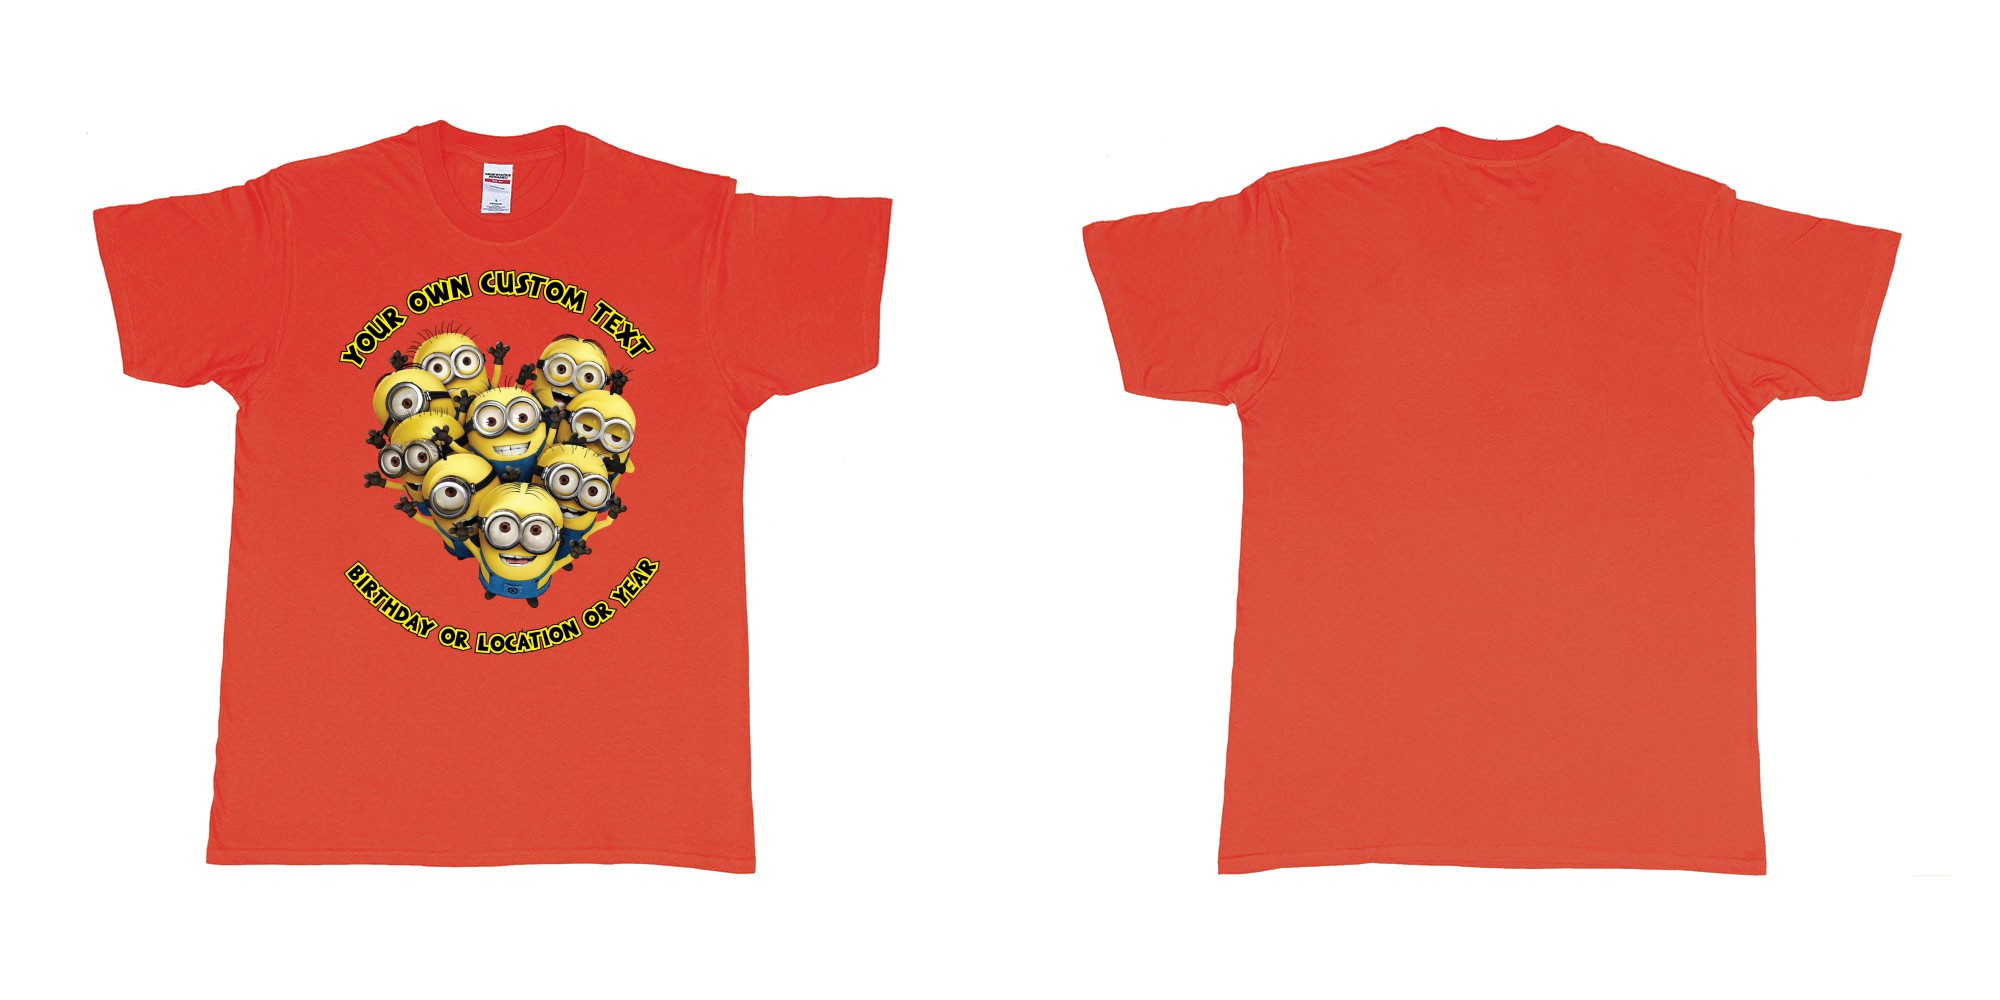 Custom tshirt design minions celebrating you in fabric color red choice your own text made in Bali by The Pirate Way